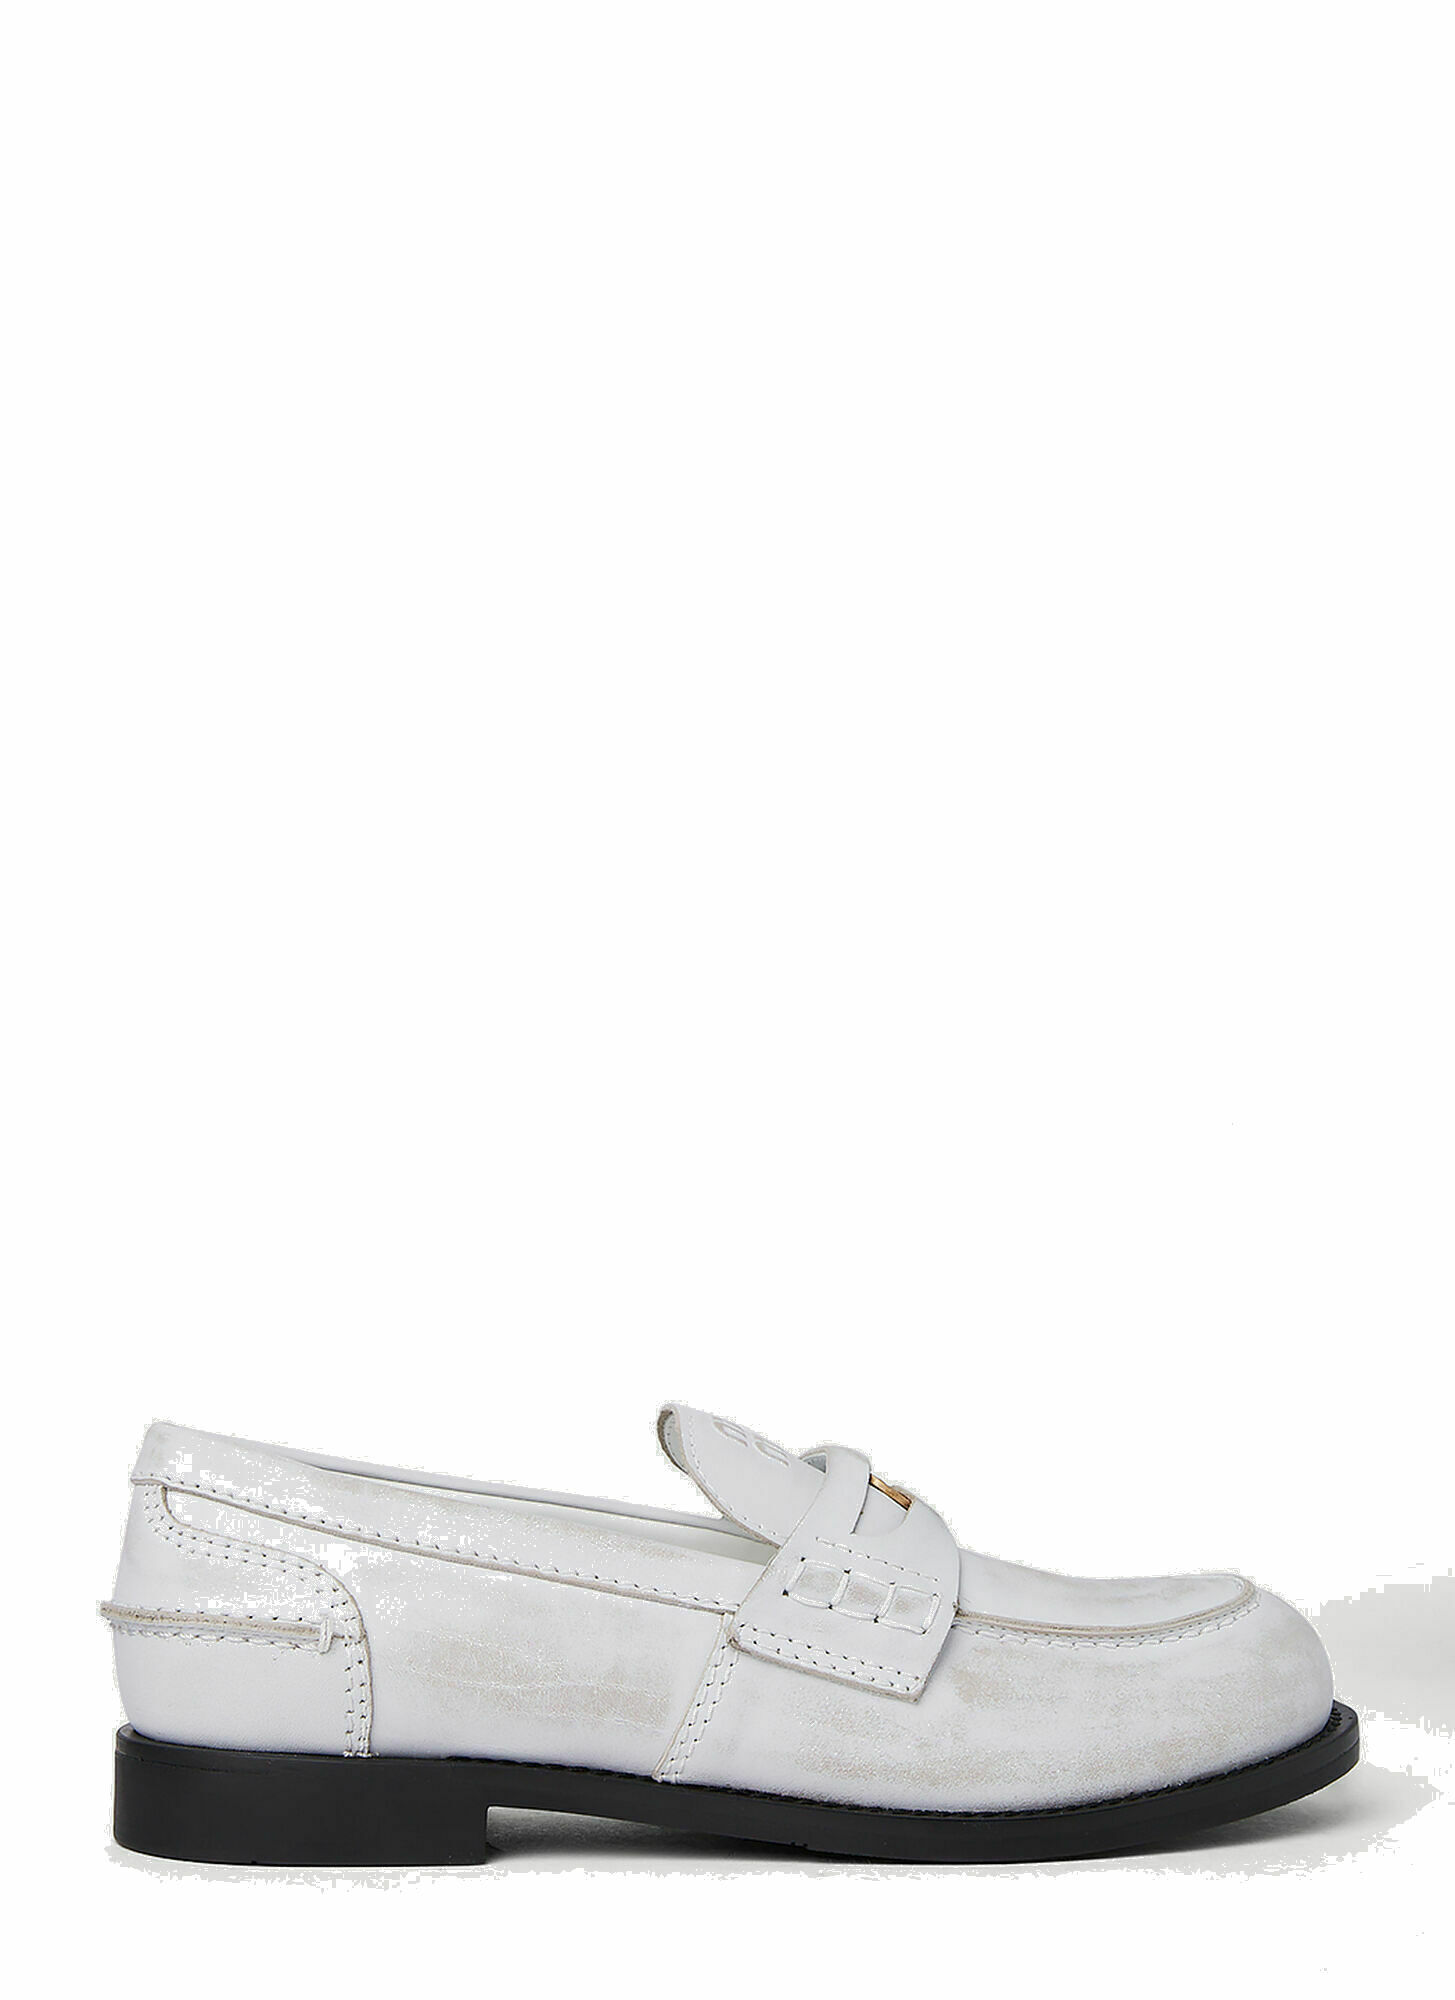 Photo: Painted Penny Loafers in White